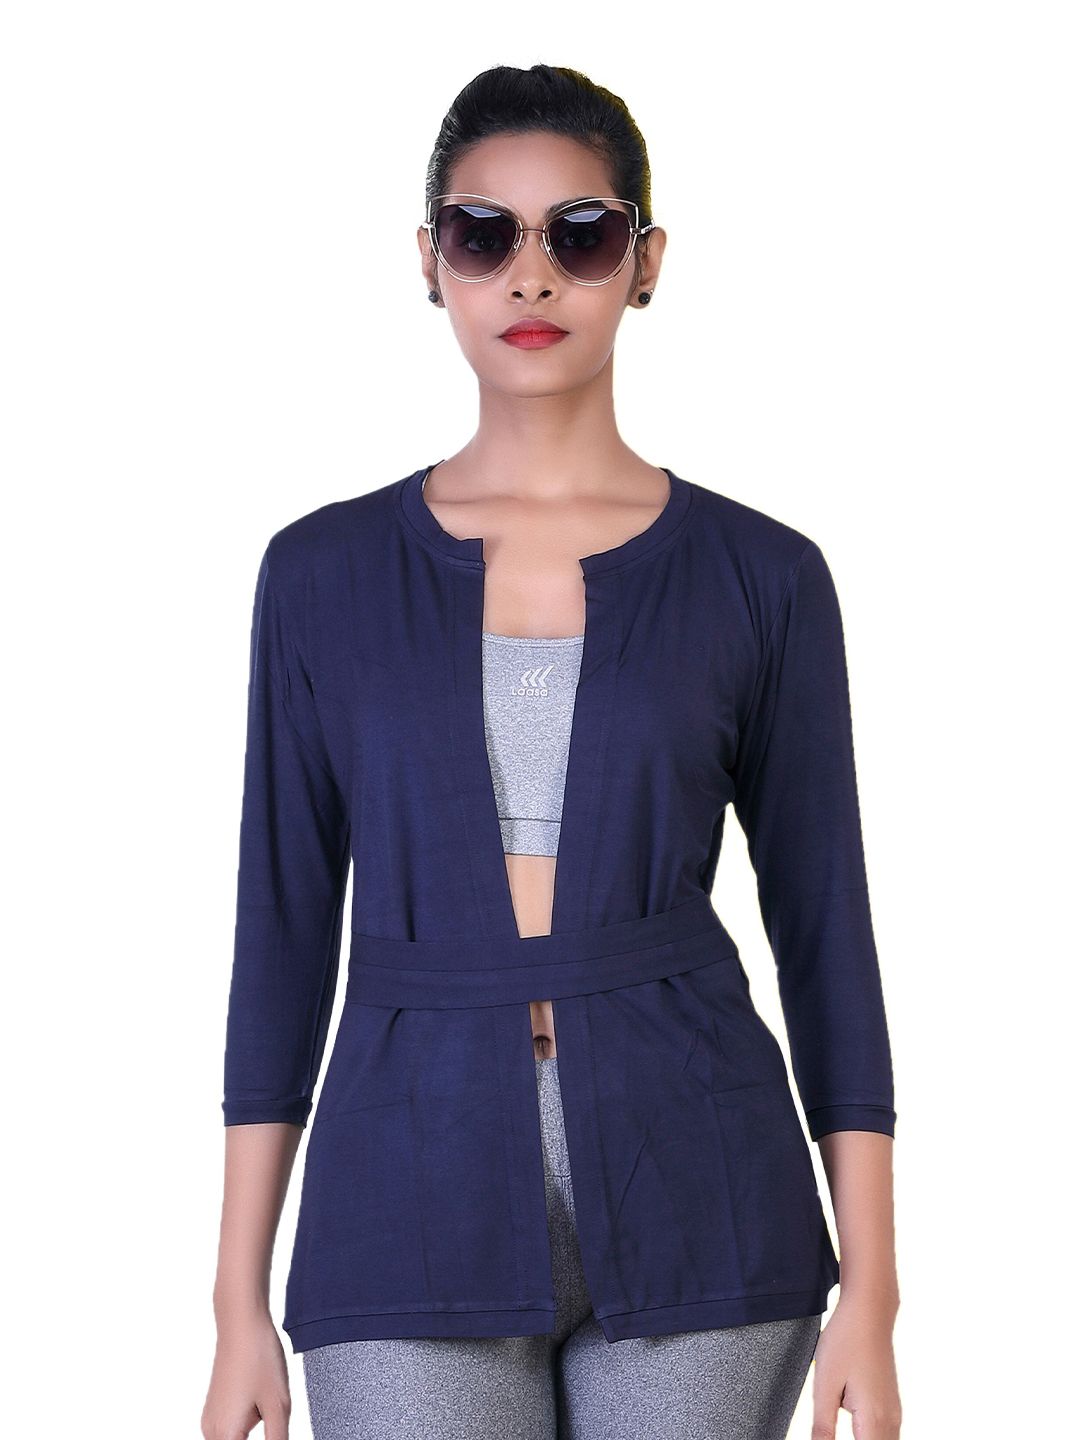 LAASA SPORTS Women Navy Blue Open Front Shrug Price in India